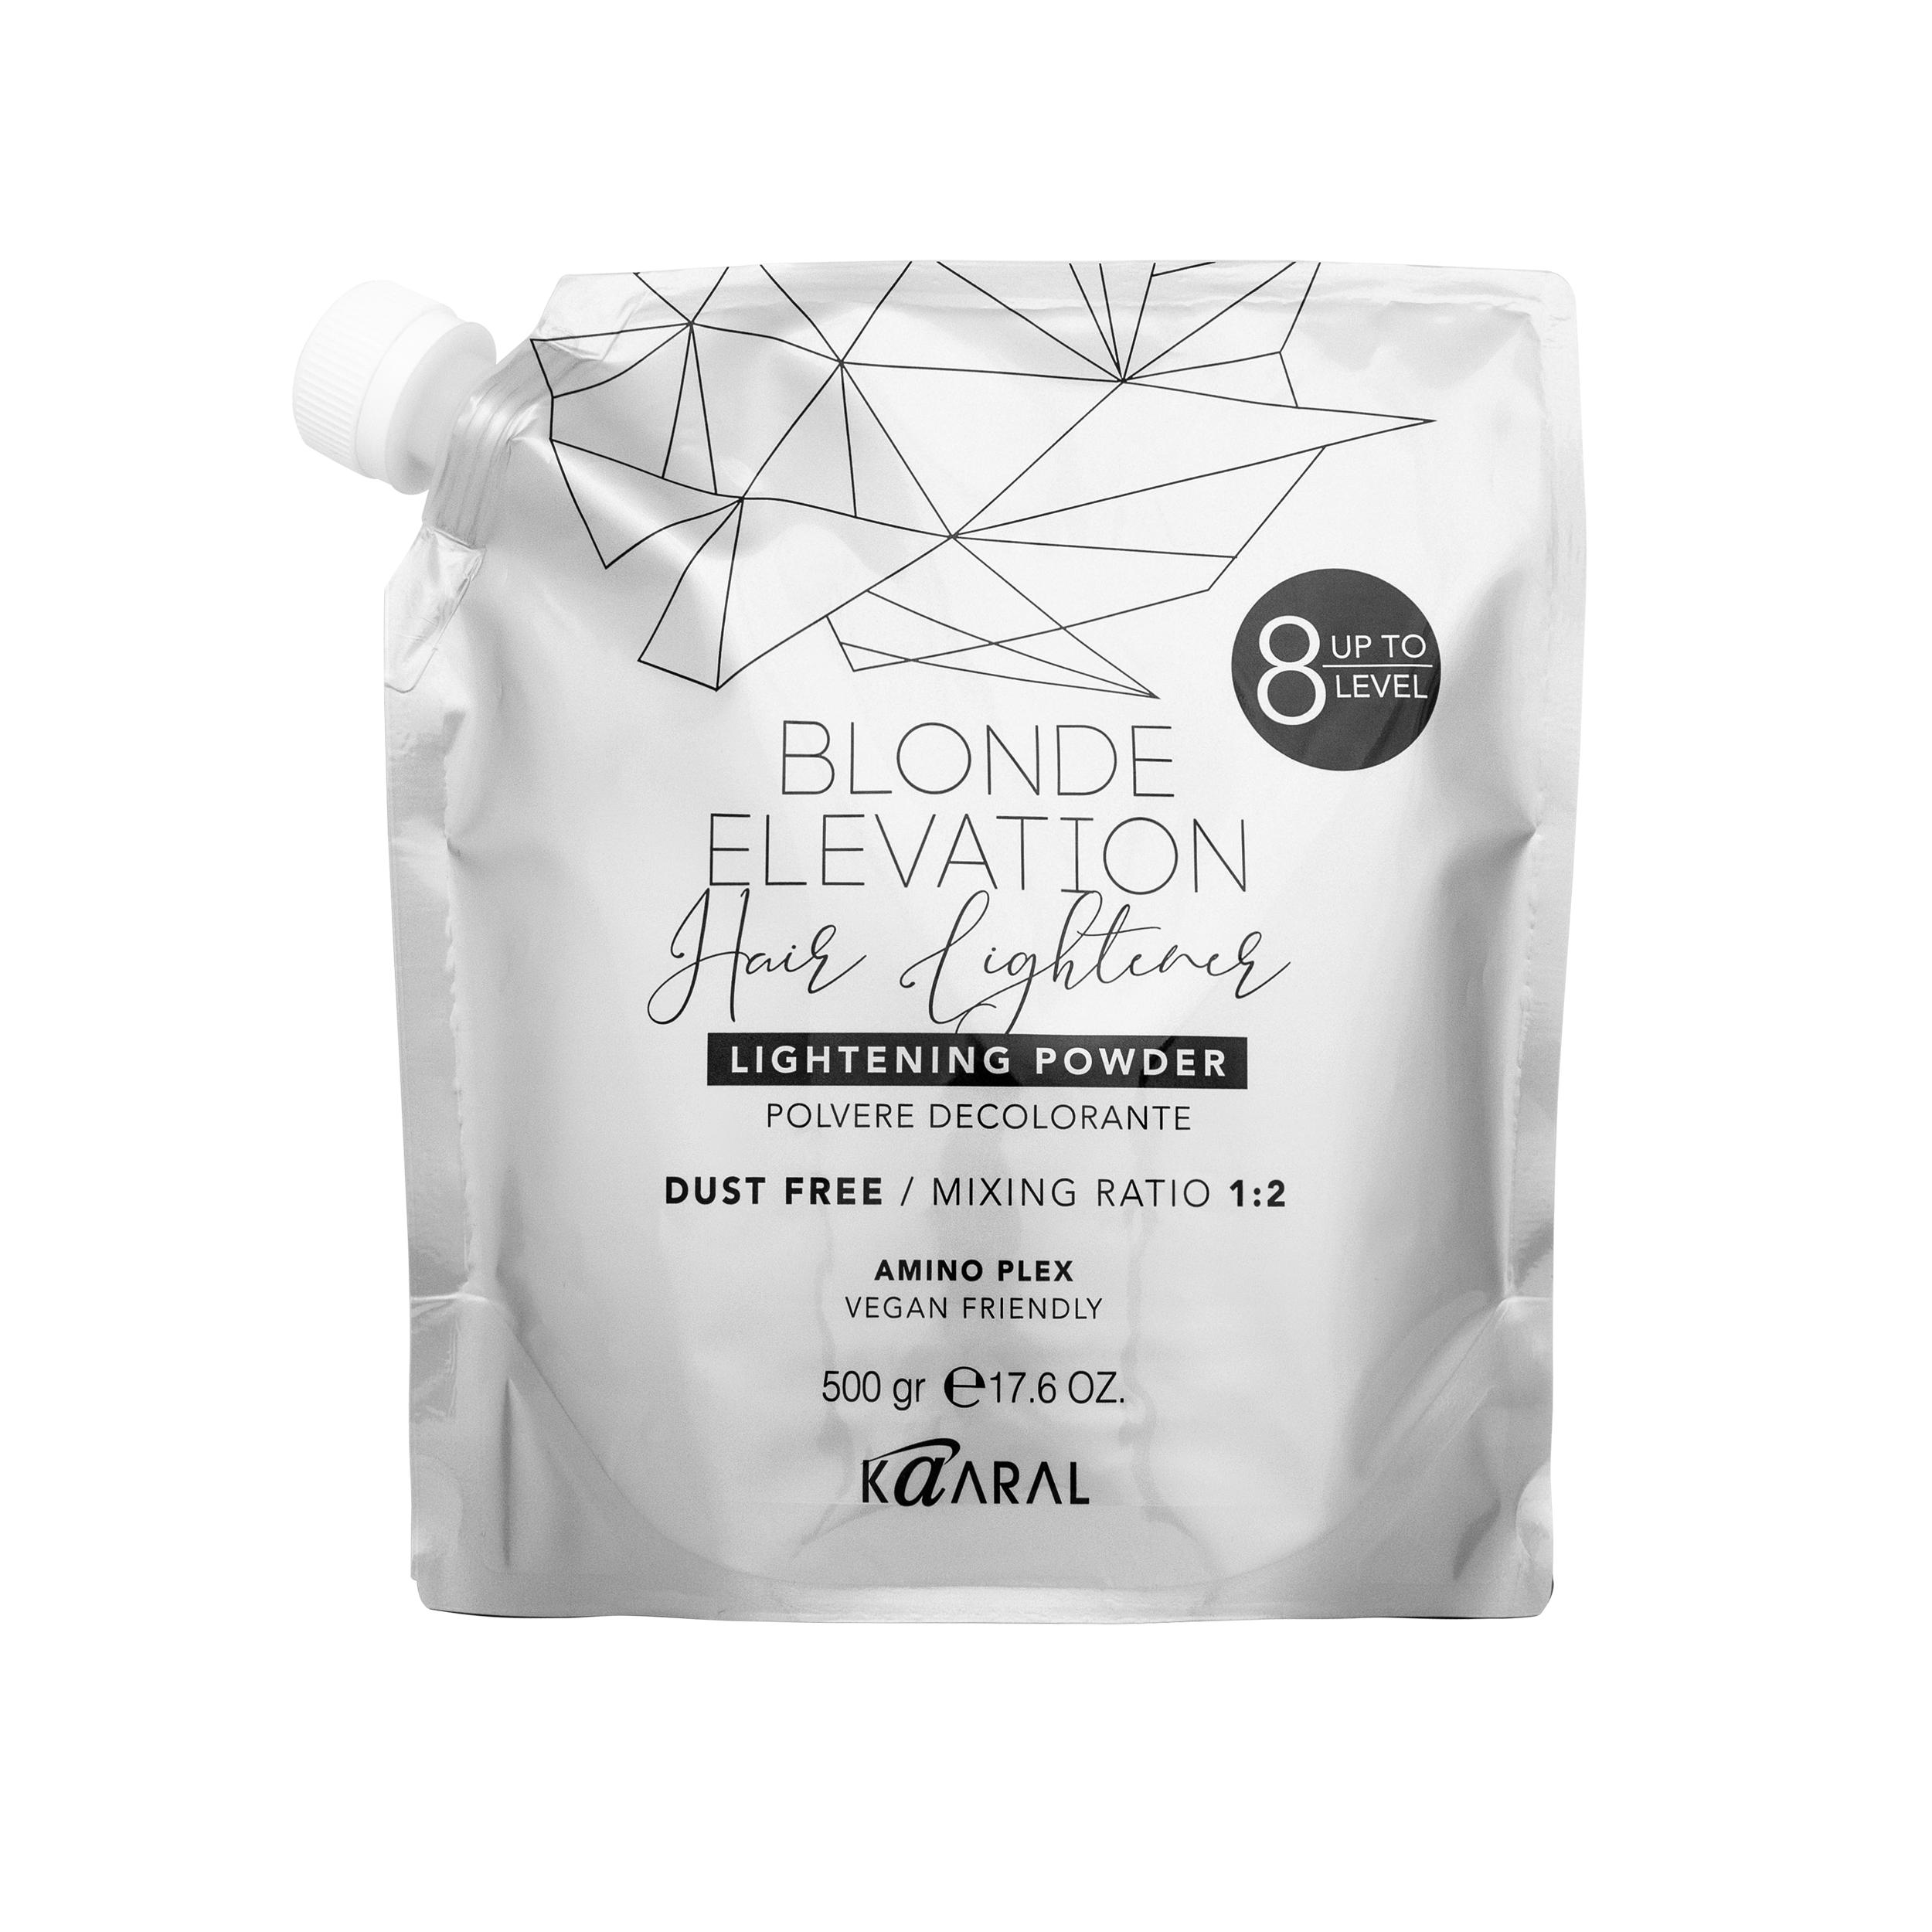 Kaaral - Blonde Elevation Lightening Powder - Creata Beauty - Professional Beauty Products